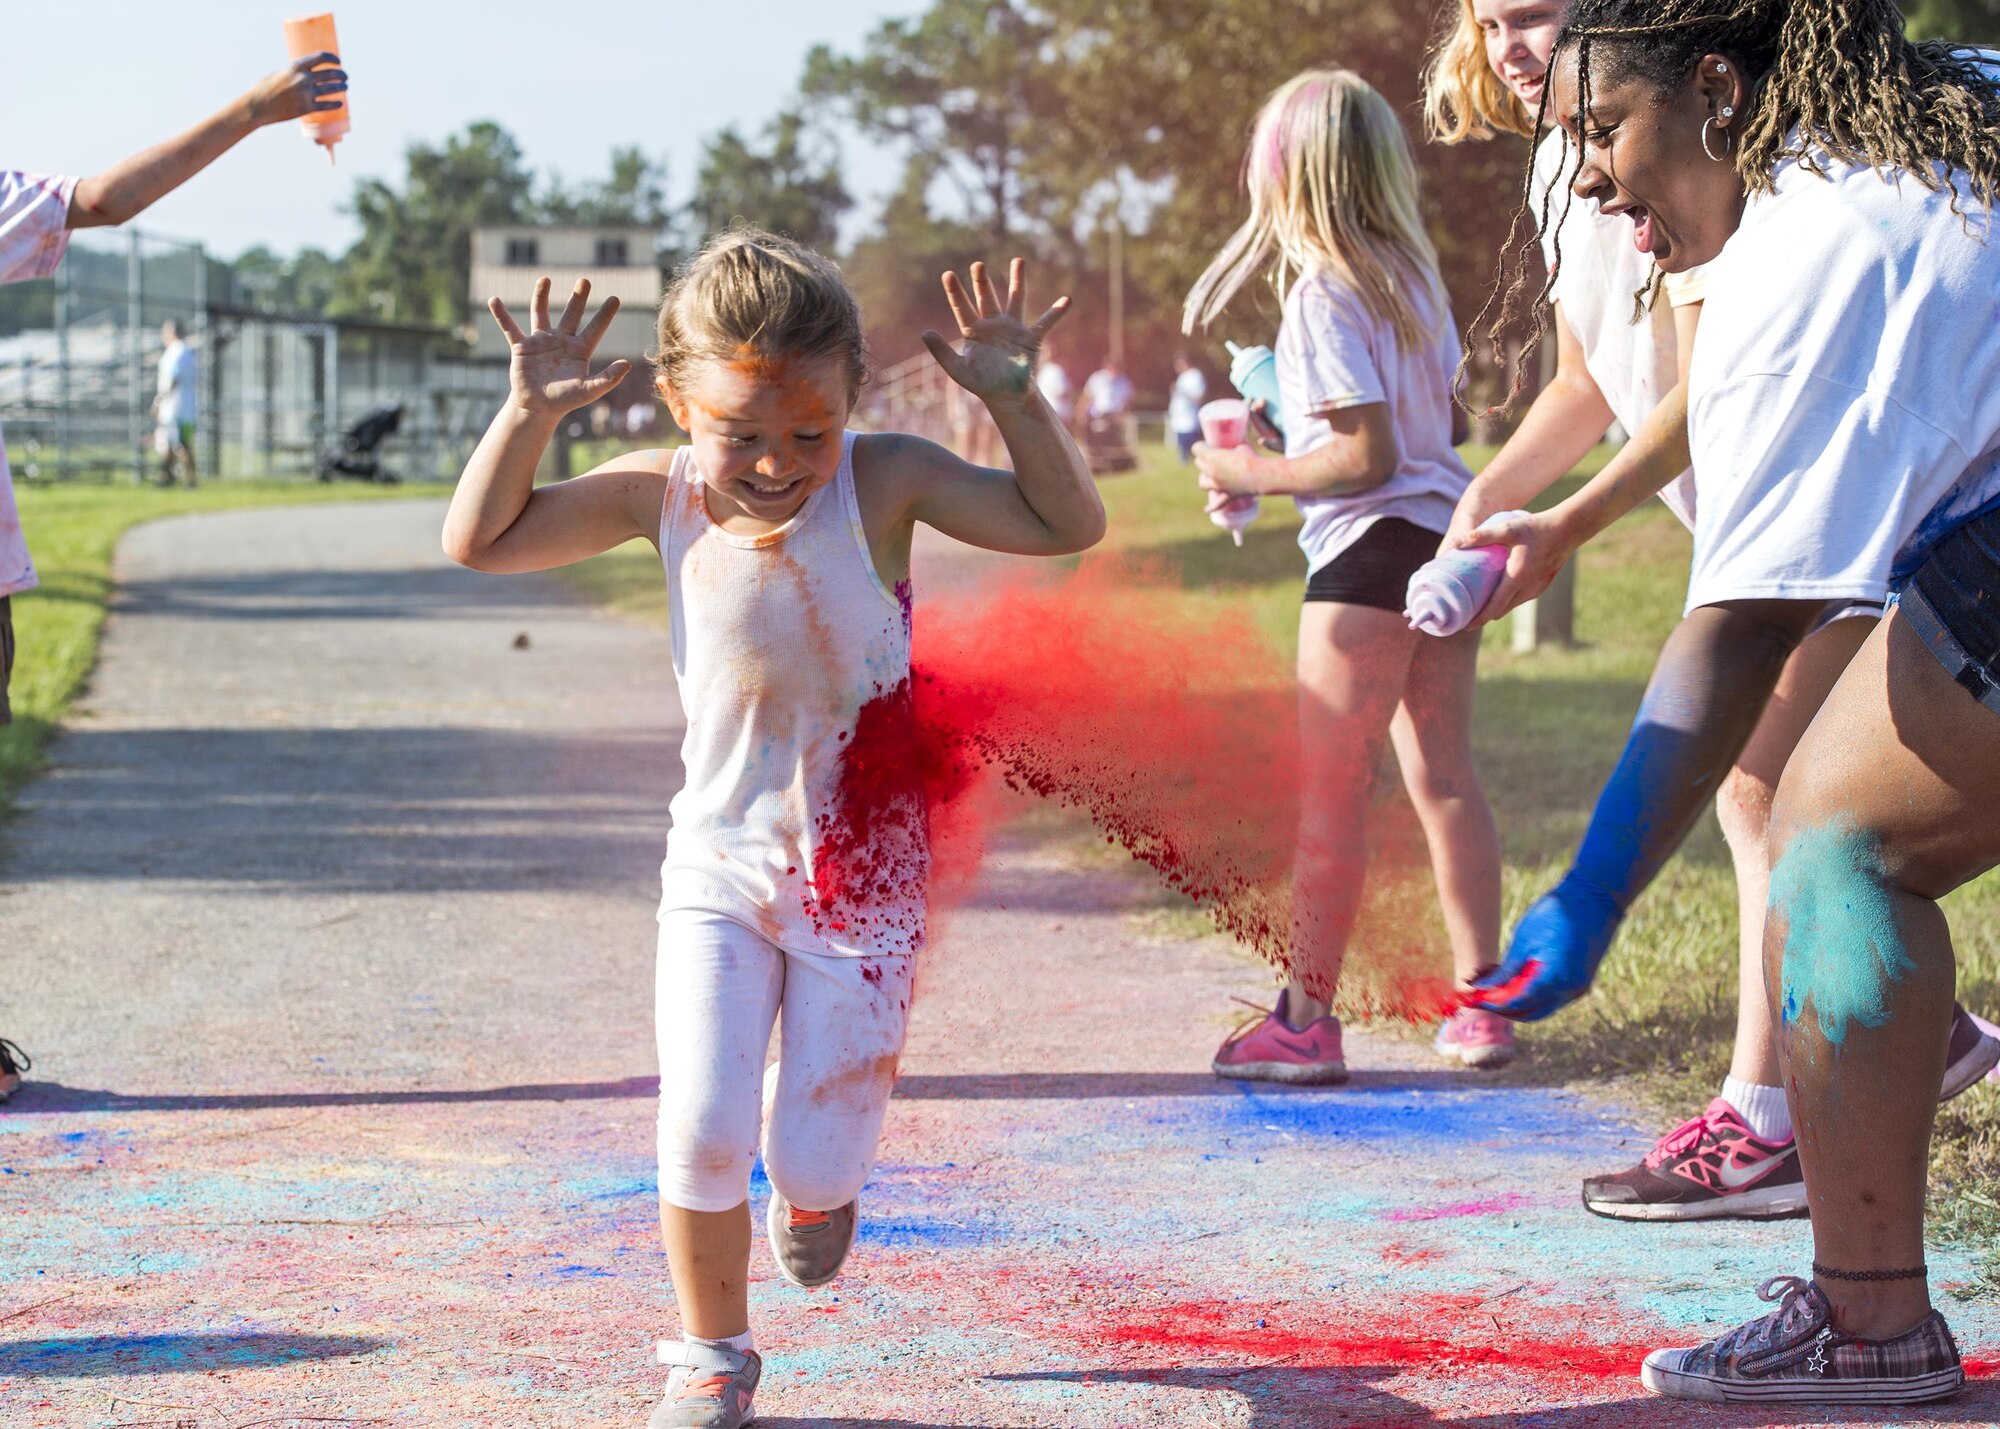 A participant runs through a ‘splash zone’ during a Kid’s Color Run, Sept. 10, 2016, at Moody Air Force Base, Ga.  Moody Youth Programs is slated to host a Go Pink Color Run for their girl power initiative in conjunction with Breast Cancer Awareness Month in October. (U.S. Air Force photo by Airman 1st Class Janiqua P. Robinson)